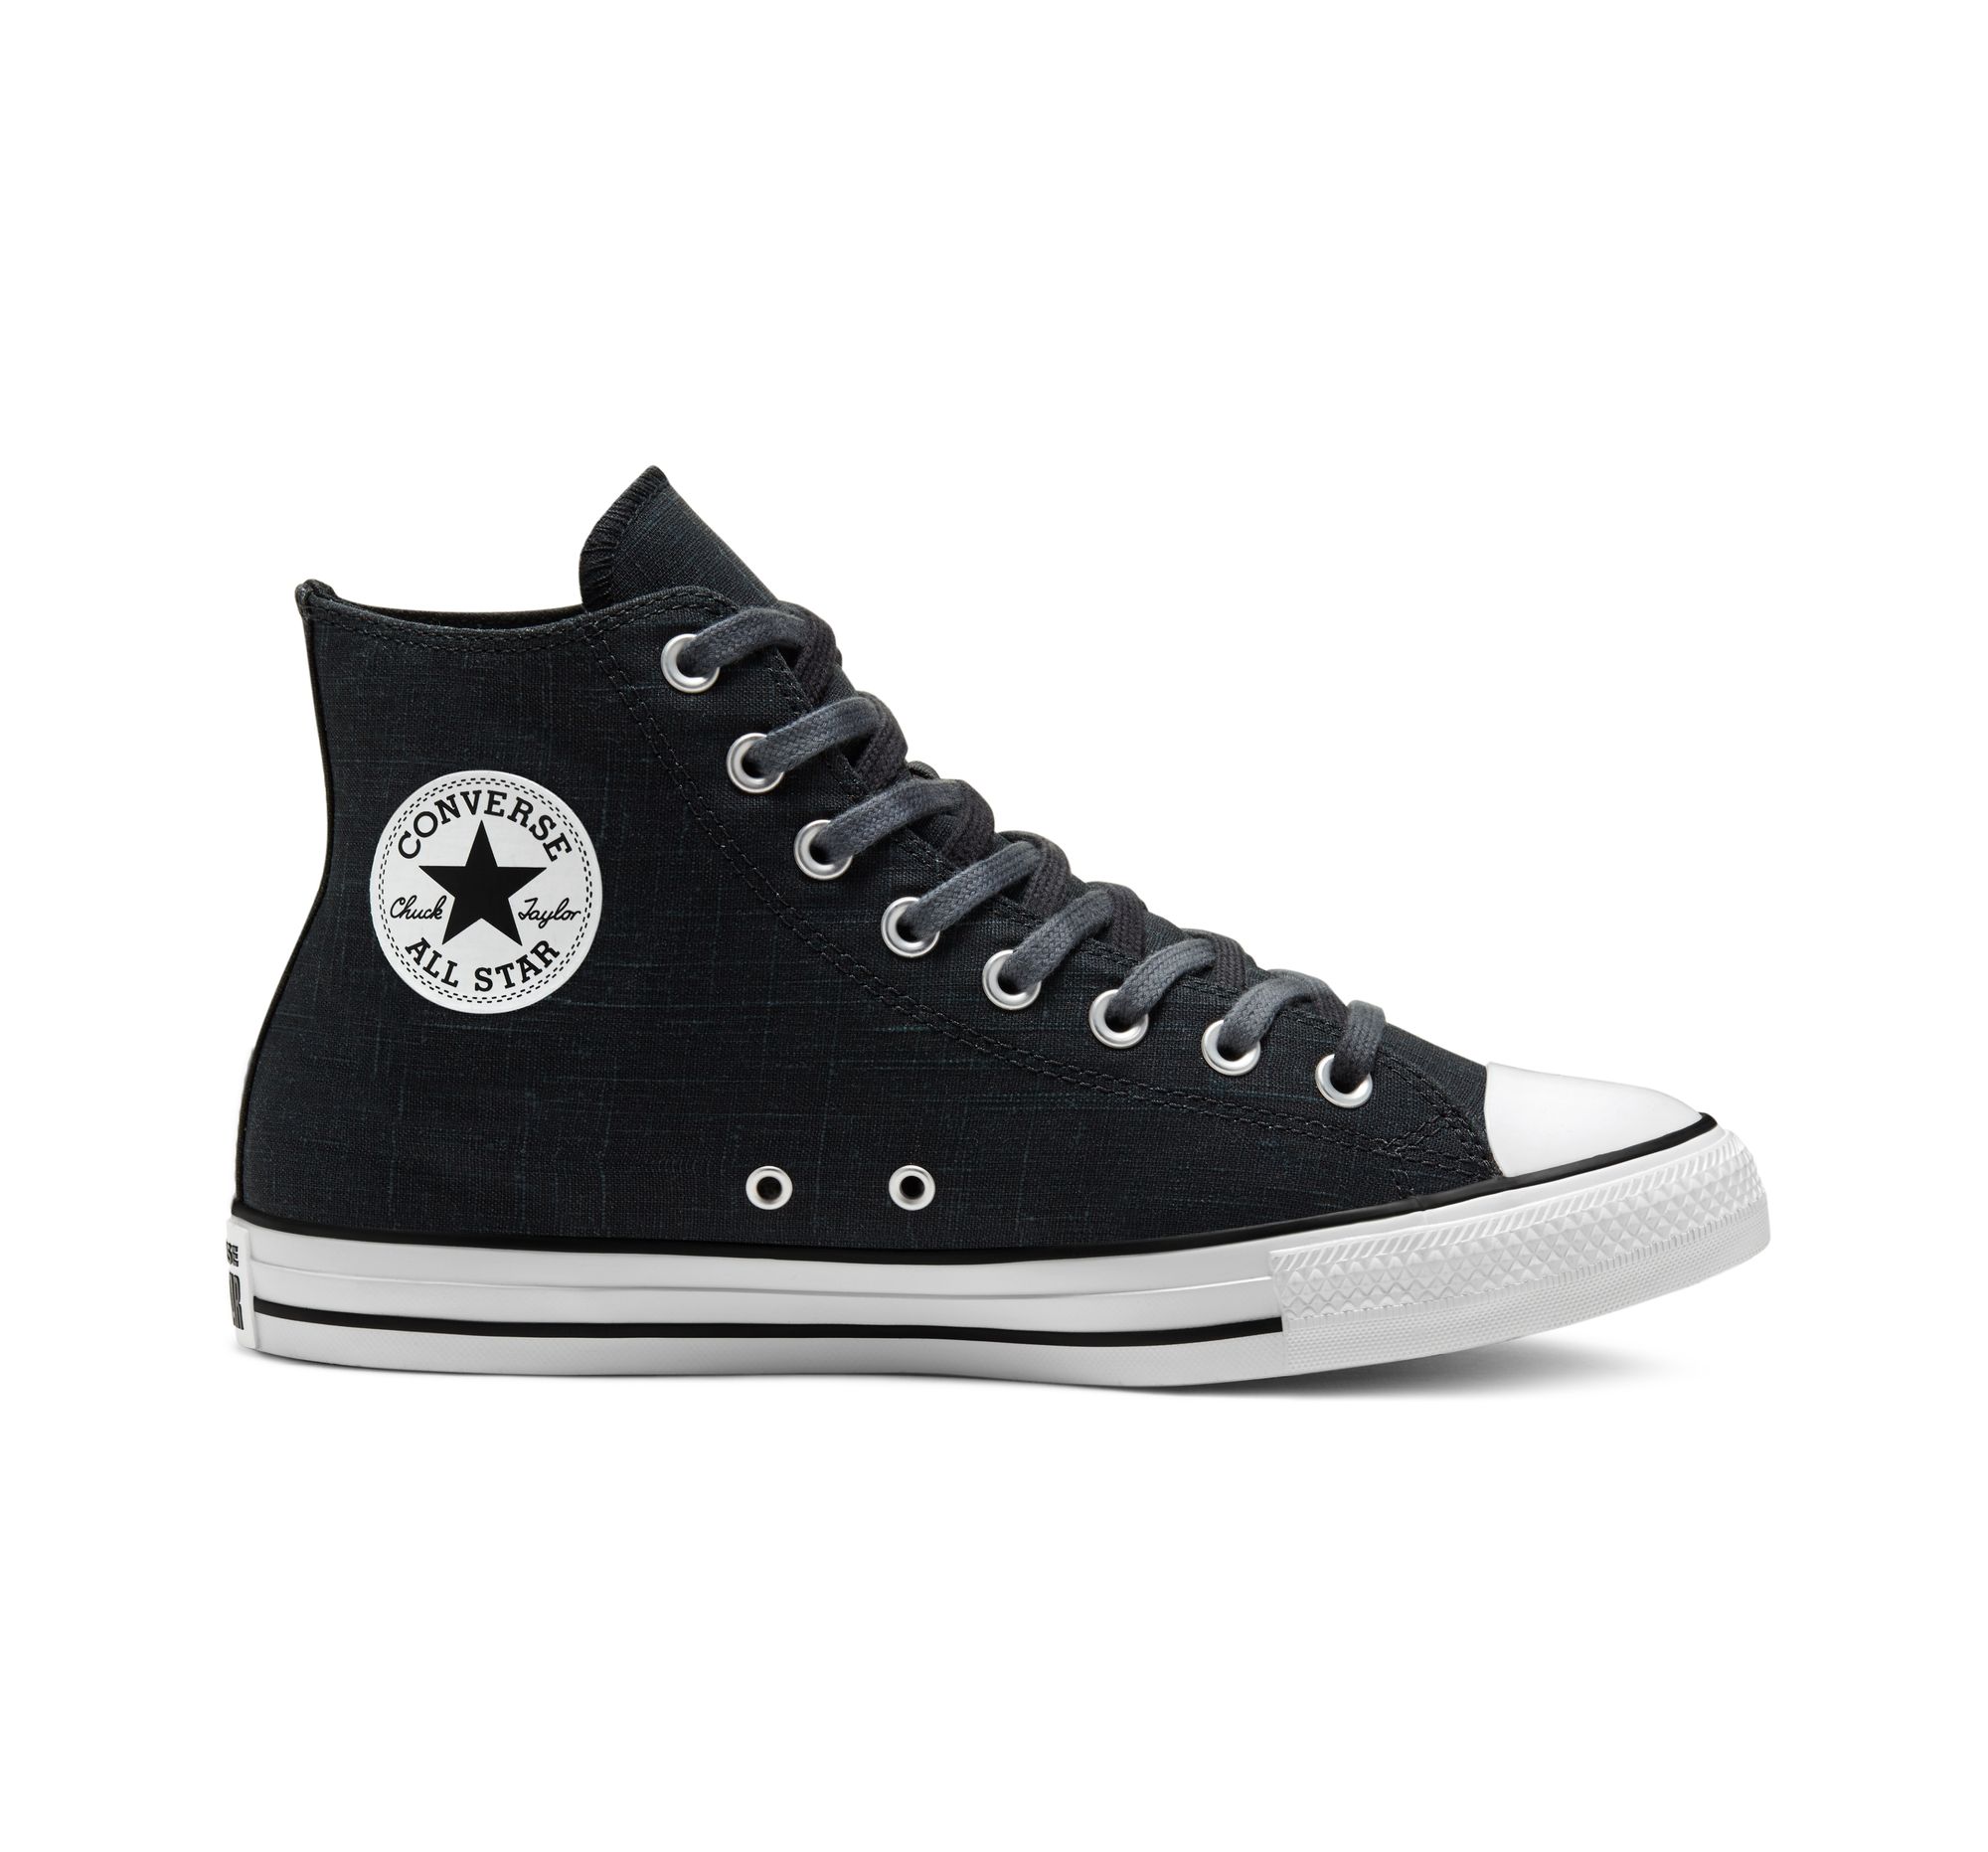 cheapest white leather converse